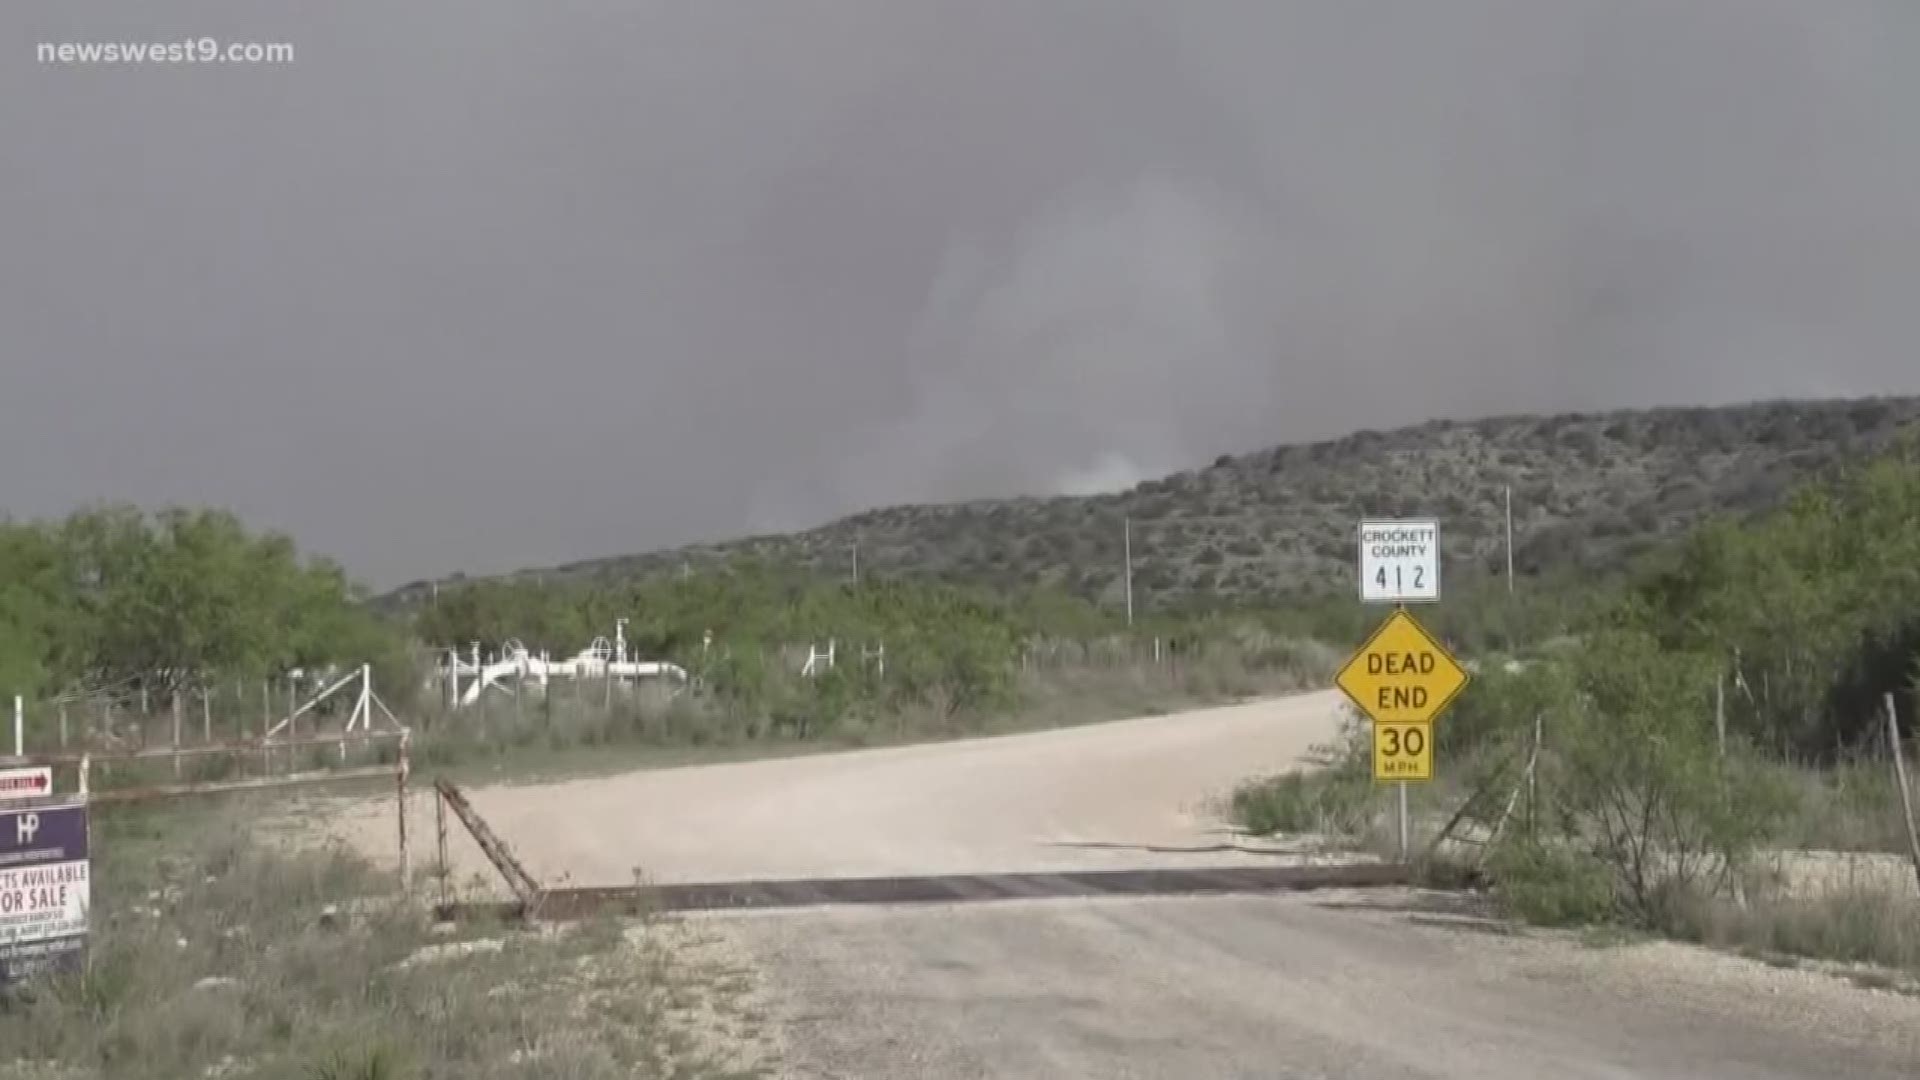 The Holcombe Road Fire began on April 19 and is now burning in Crockett and Val Verde Counties